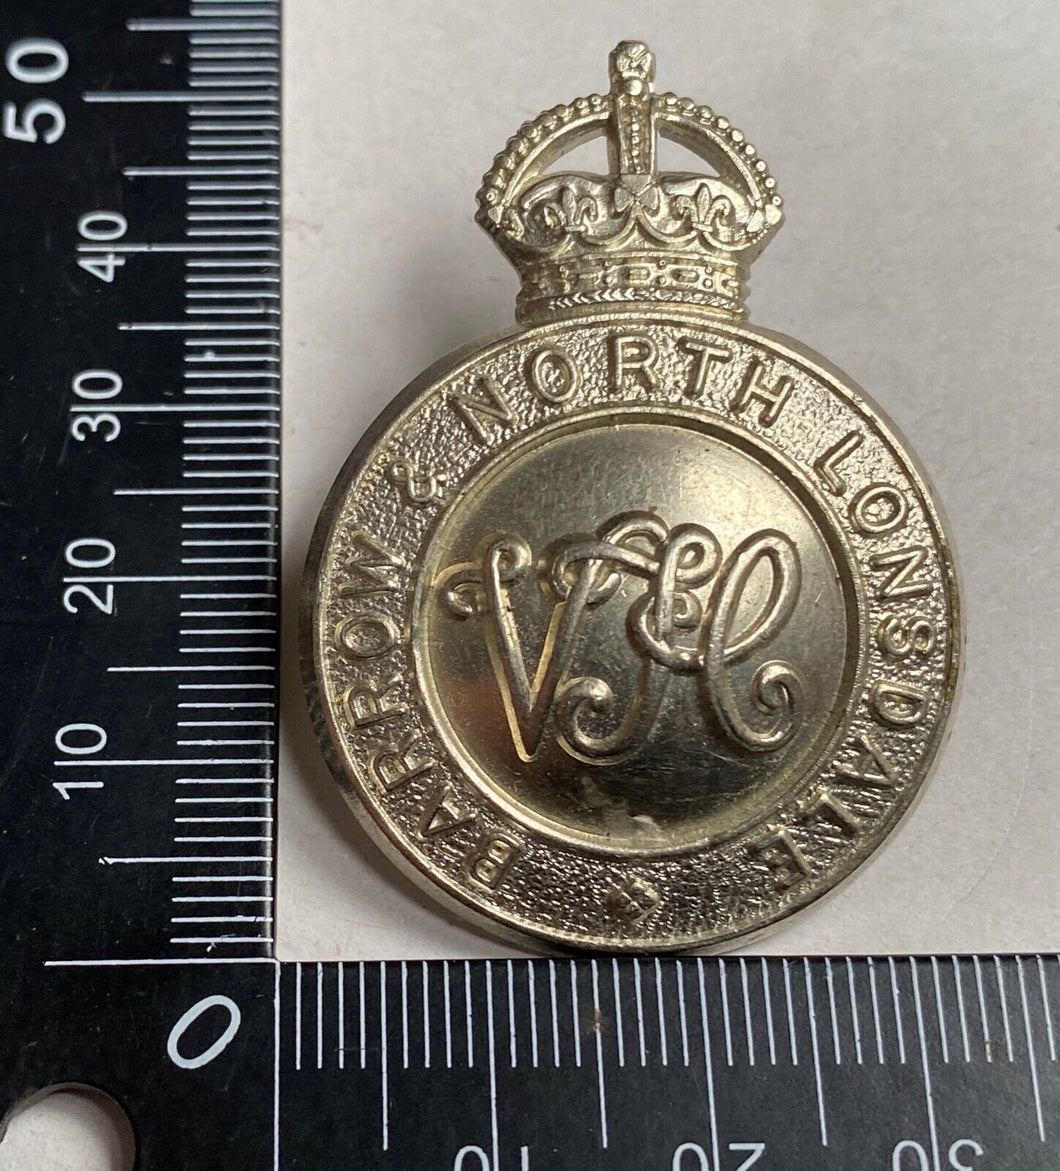 WW1 / WW2 British Army - Barrow and North Lonsdale white metal cap badge.